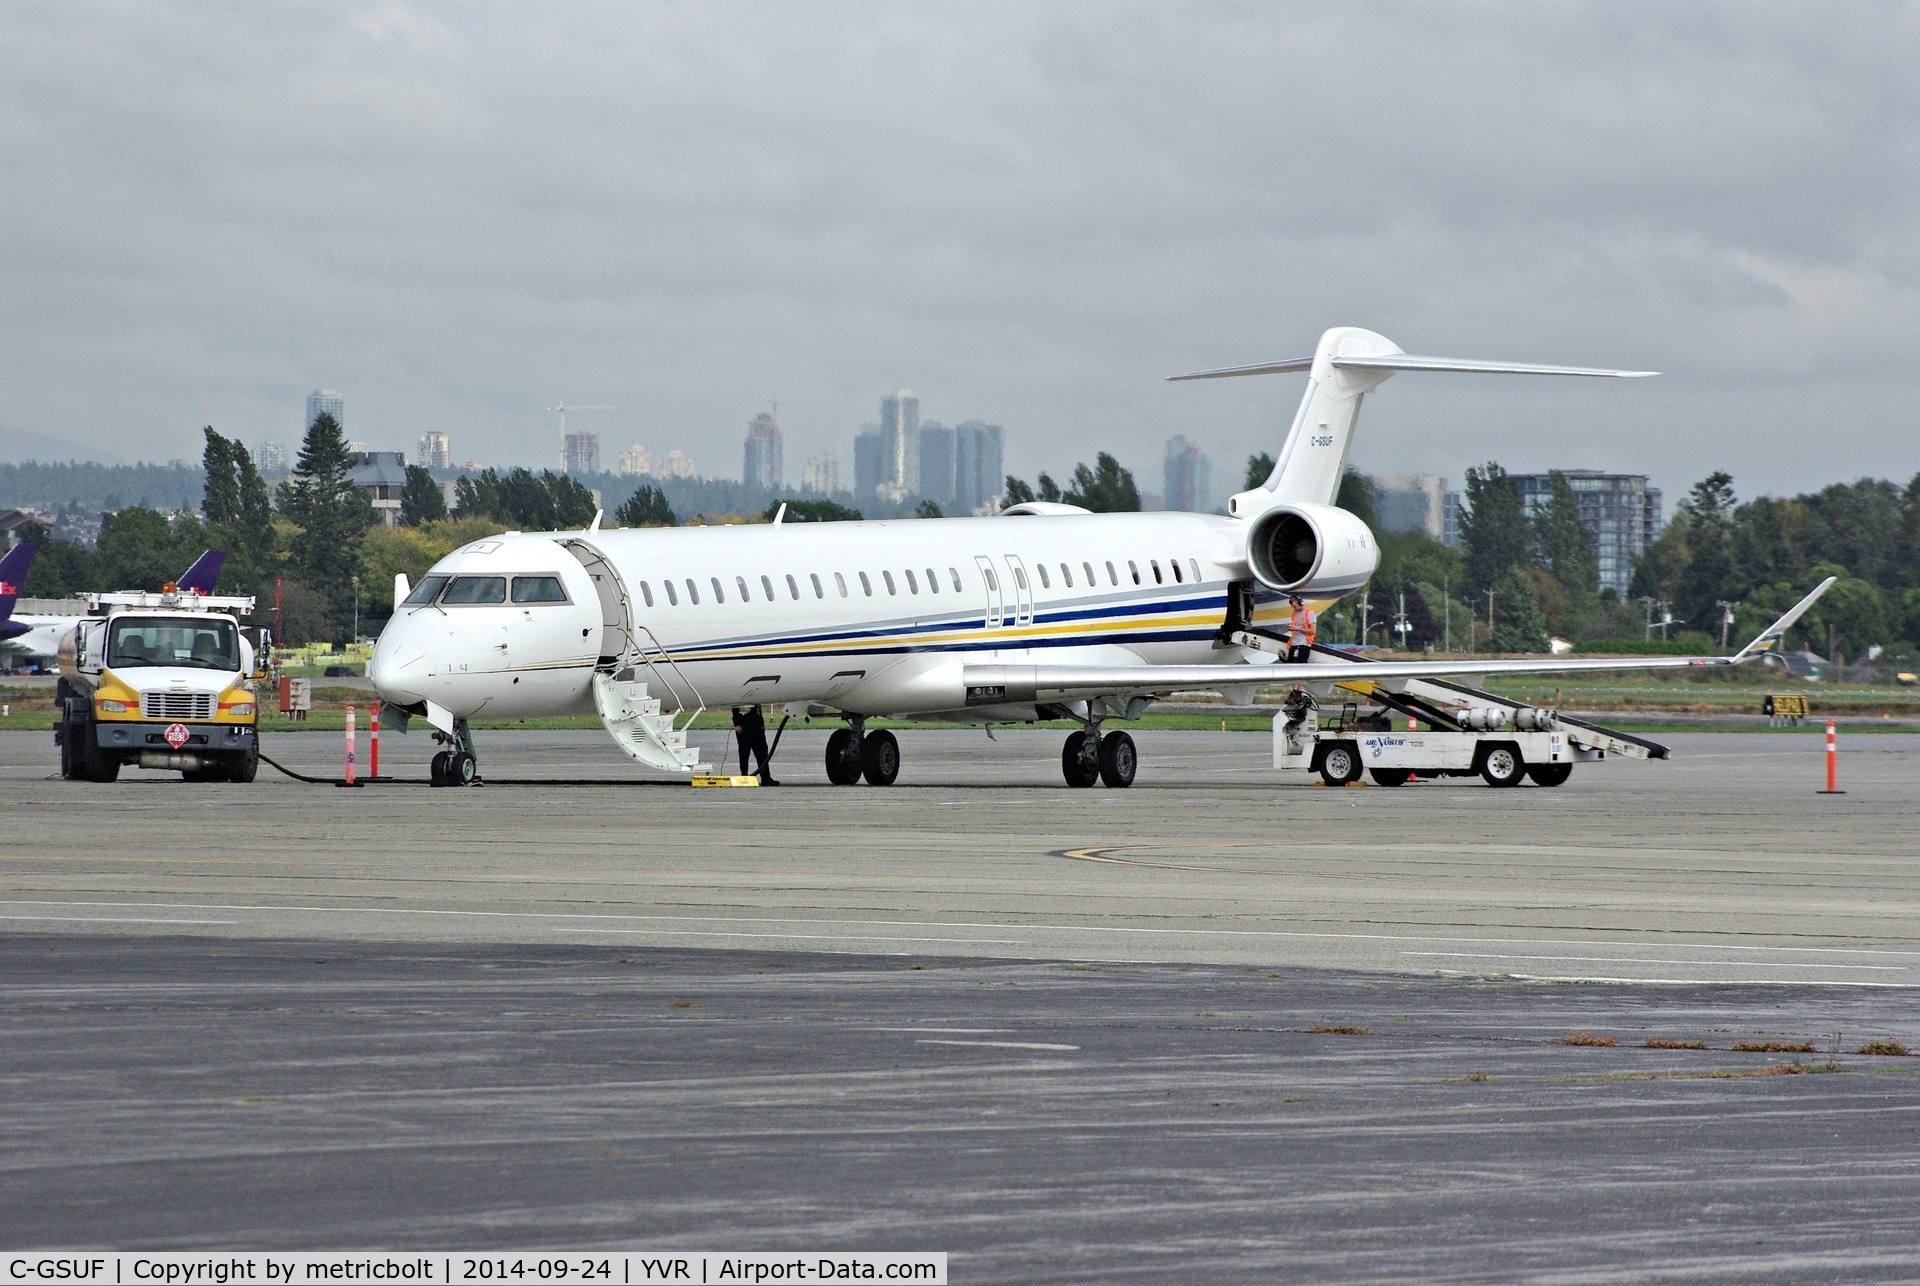 C-GSUF, 2011 Bombardier CRJ-900LR (CL-600-2D24) C/N 15271, Quick turnaround and refuelling